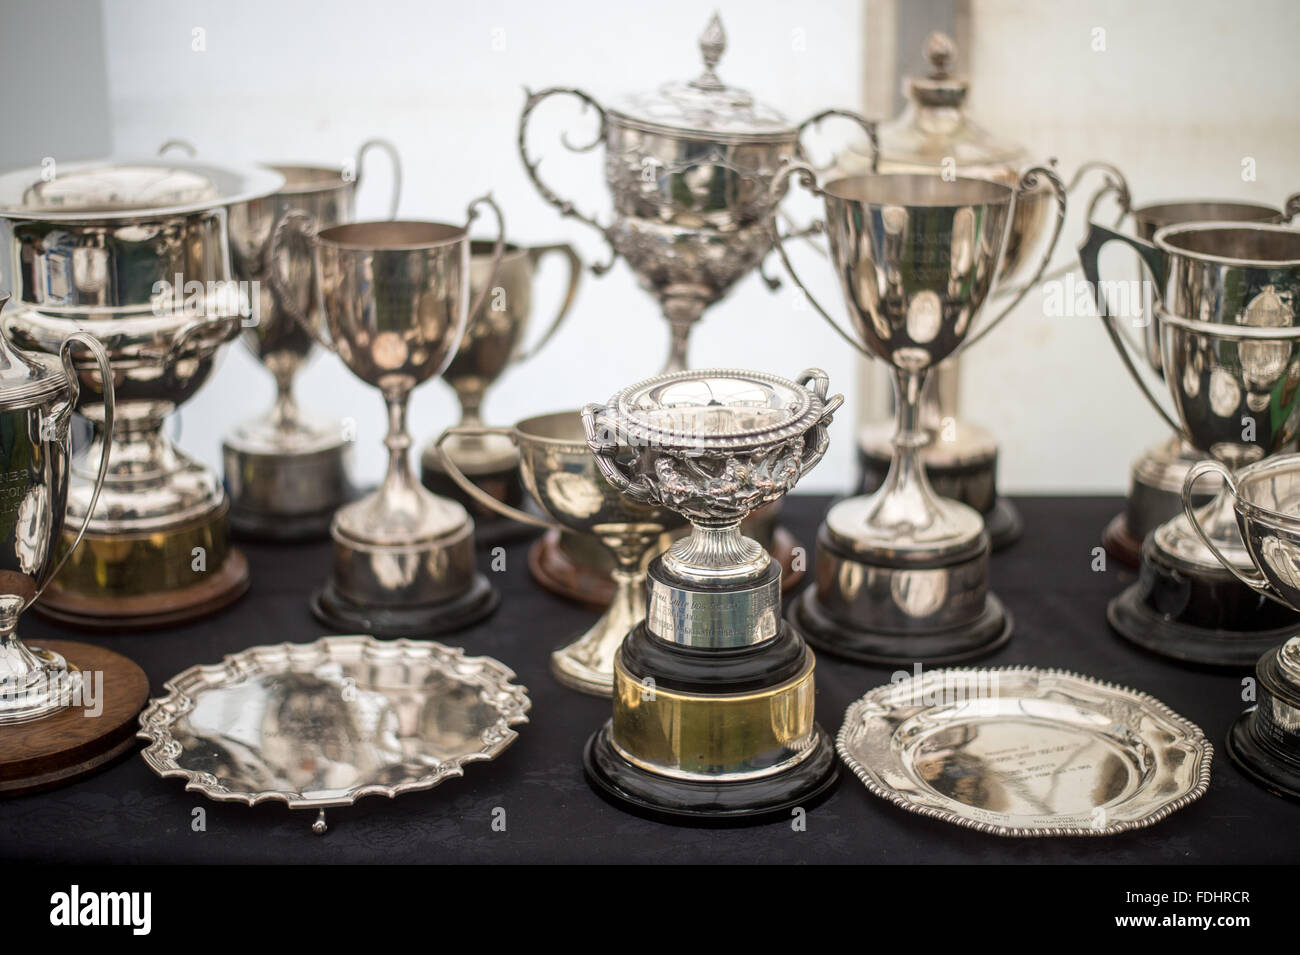 Silver Trophies at the International Sheepdog Trials in Moffat , Scotland, UK. Stock Photo